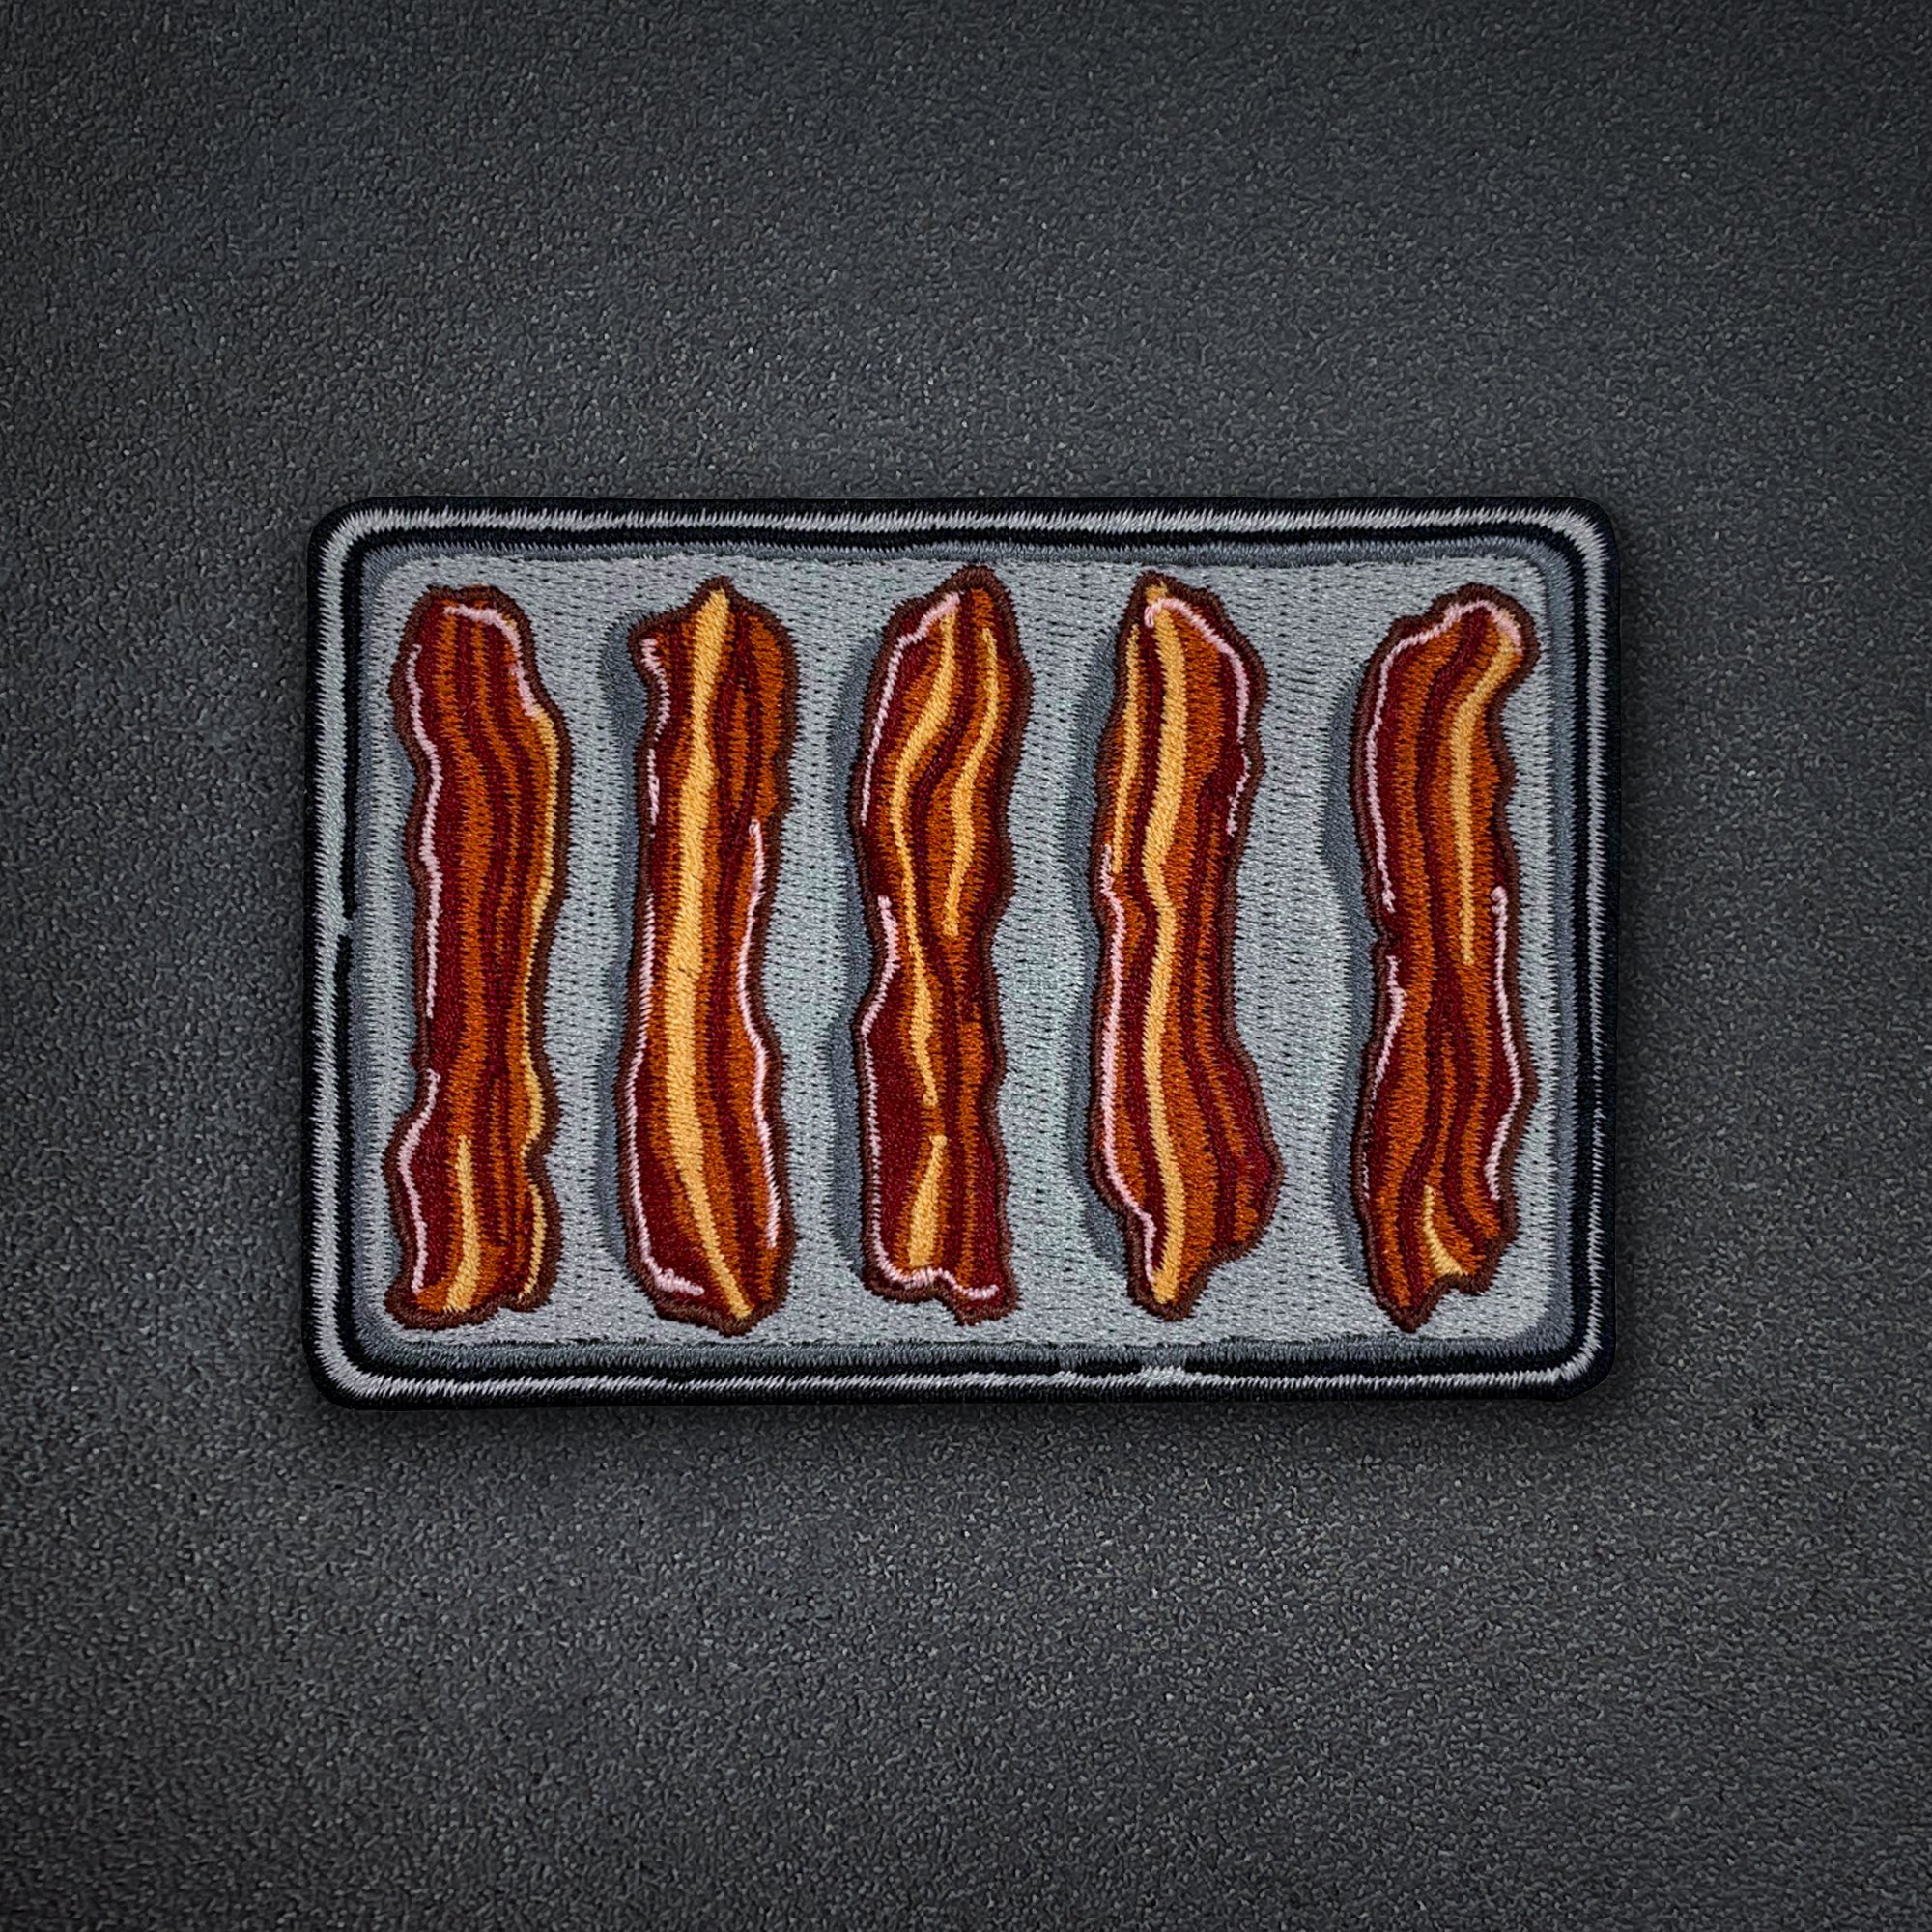 BACON V2 "COOKED BACON" PATCH